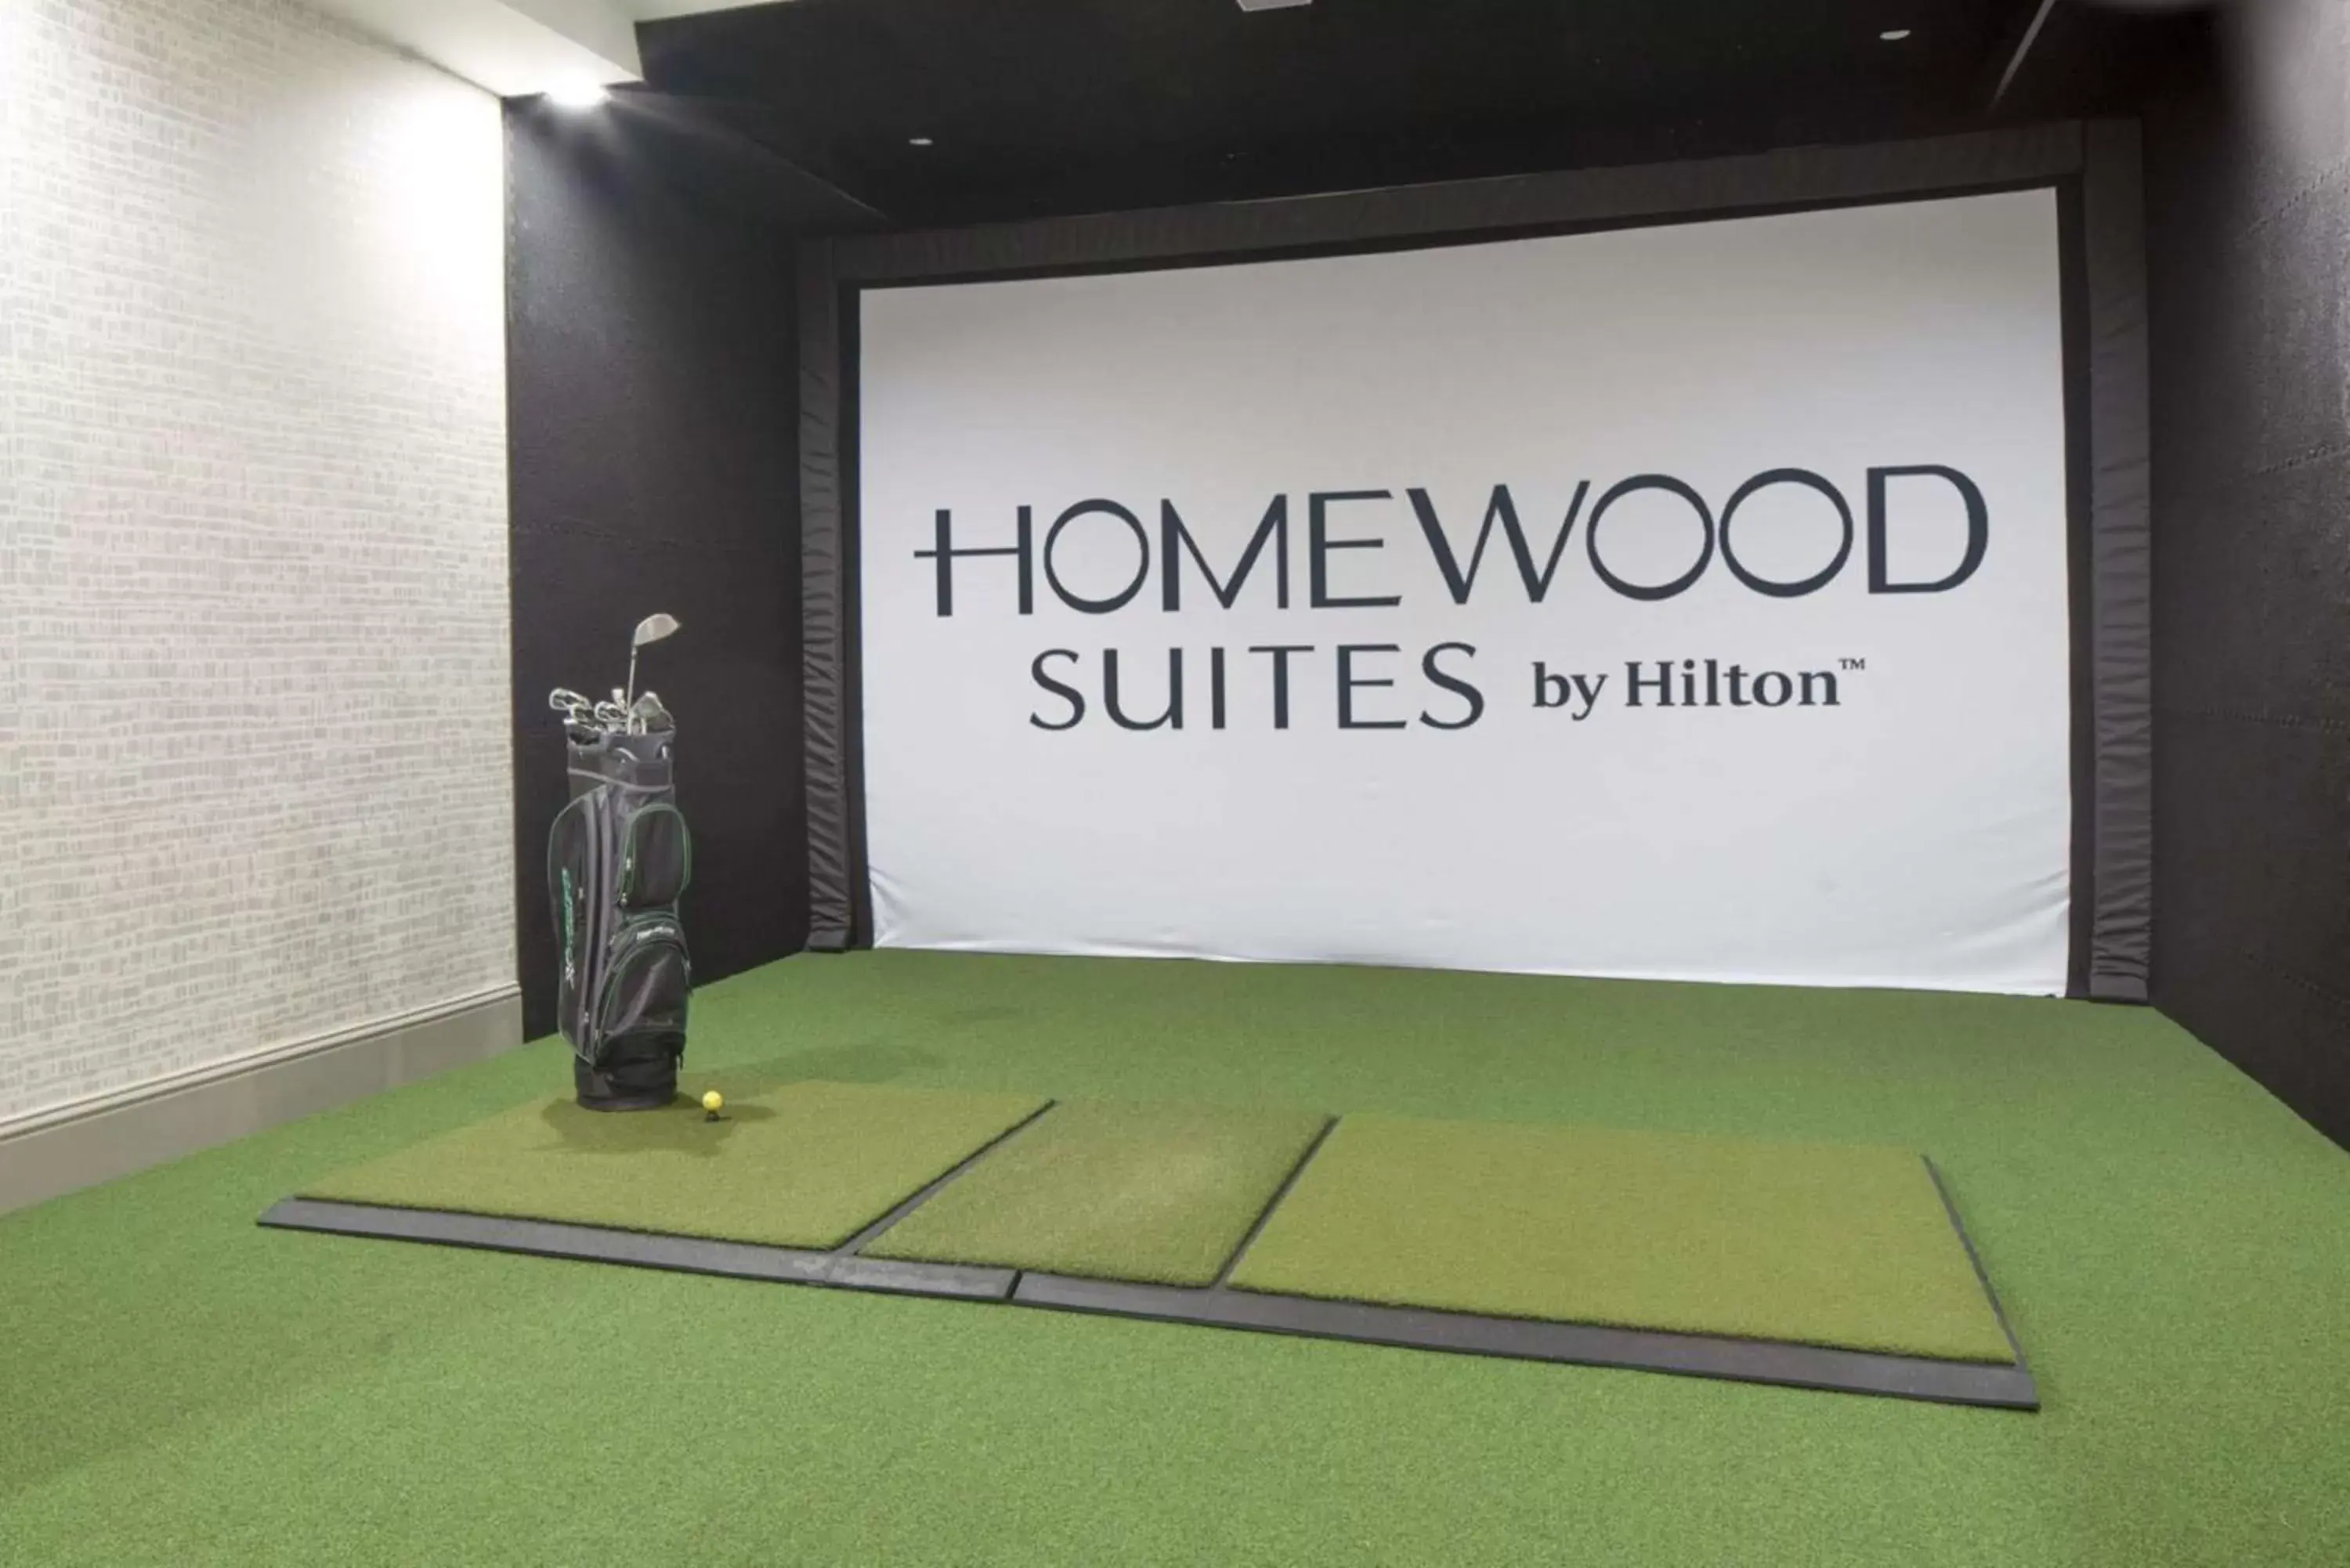 Sports in Homewood Suites by Hilton DFW Airport South, TX